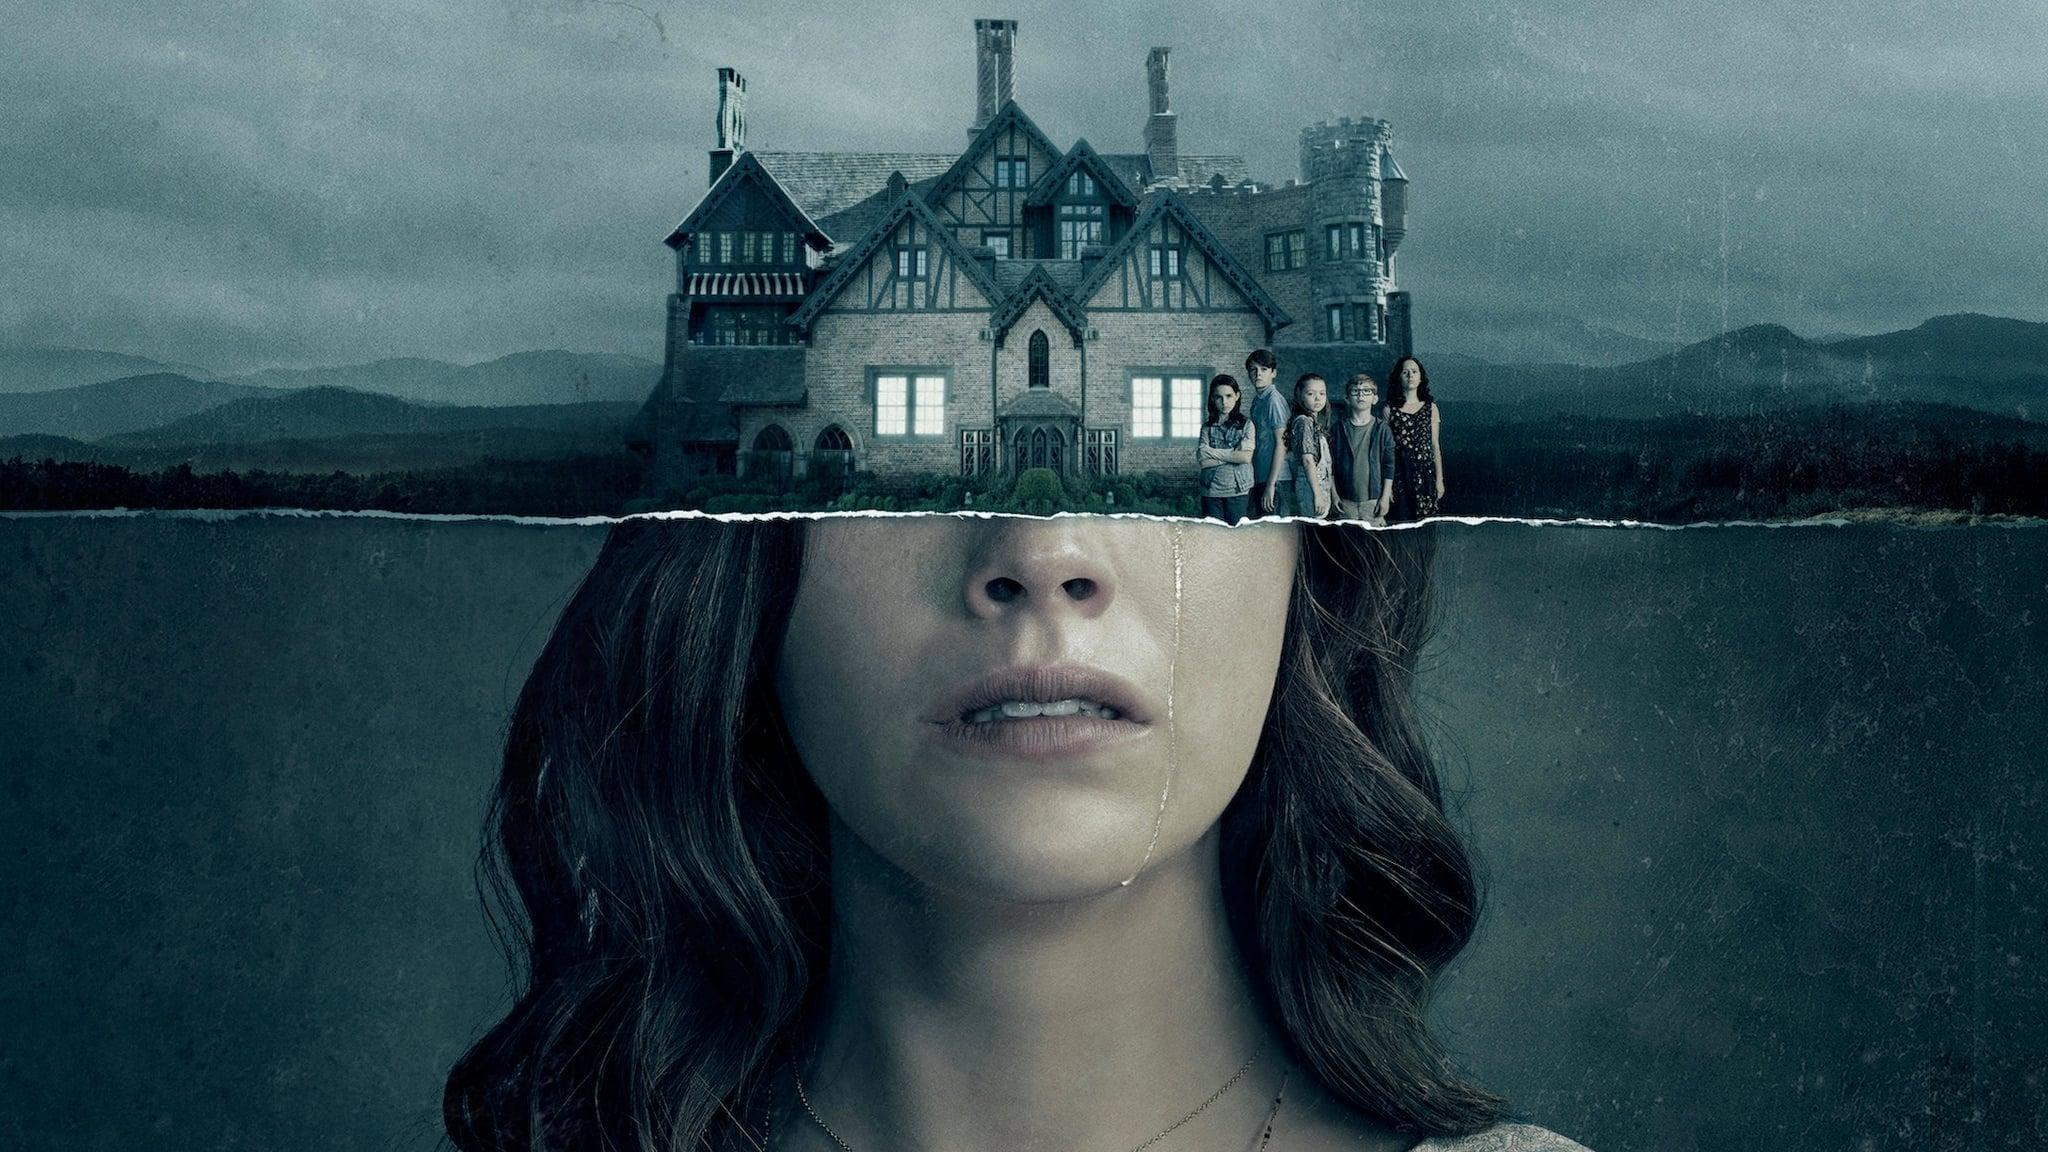 The Haunting of Hill House backdrop